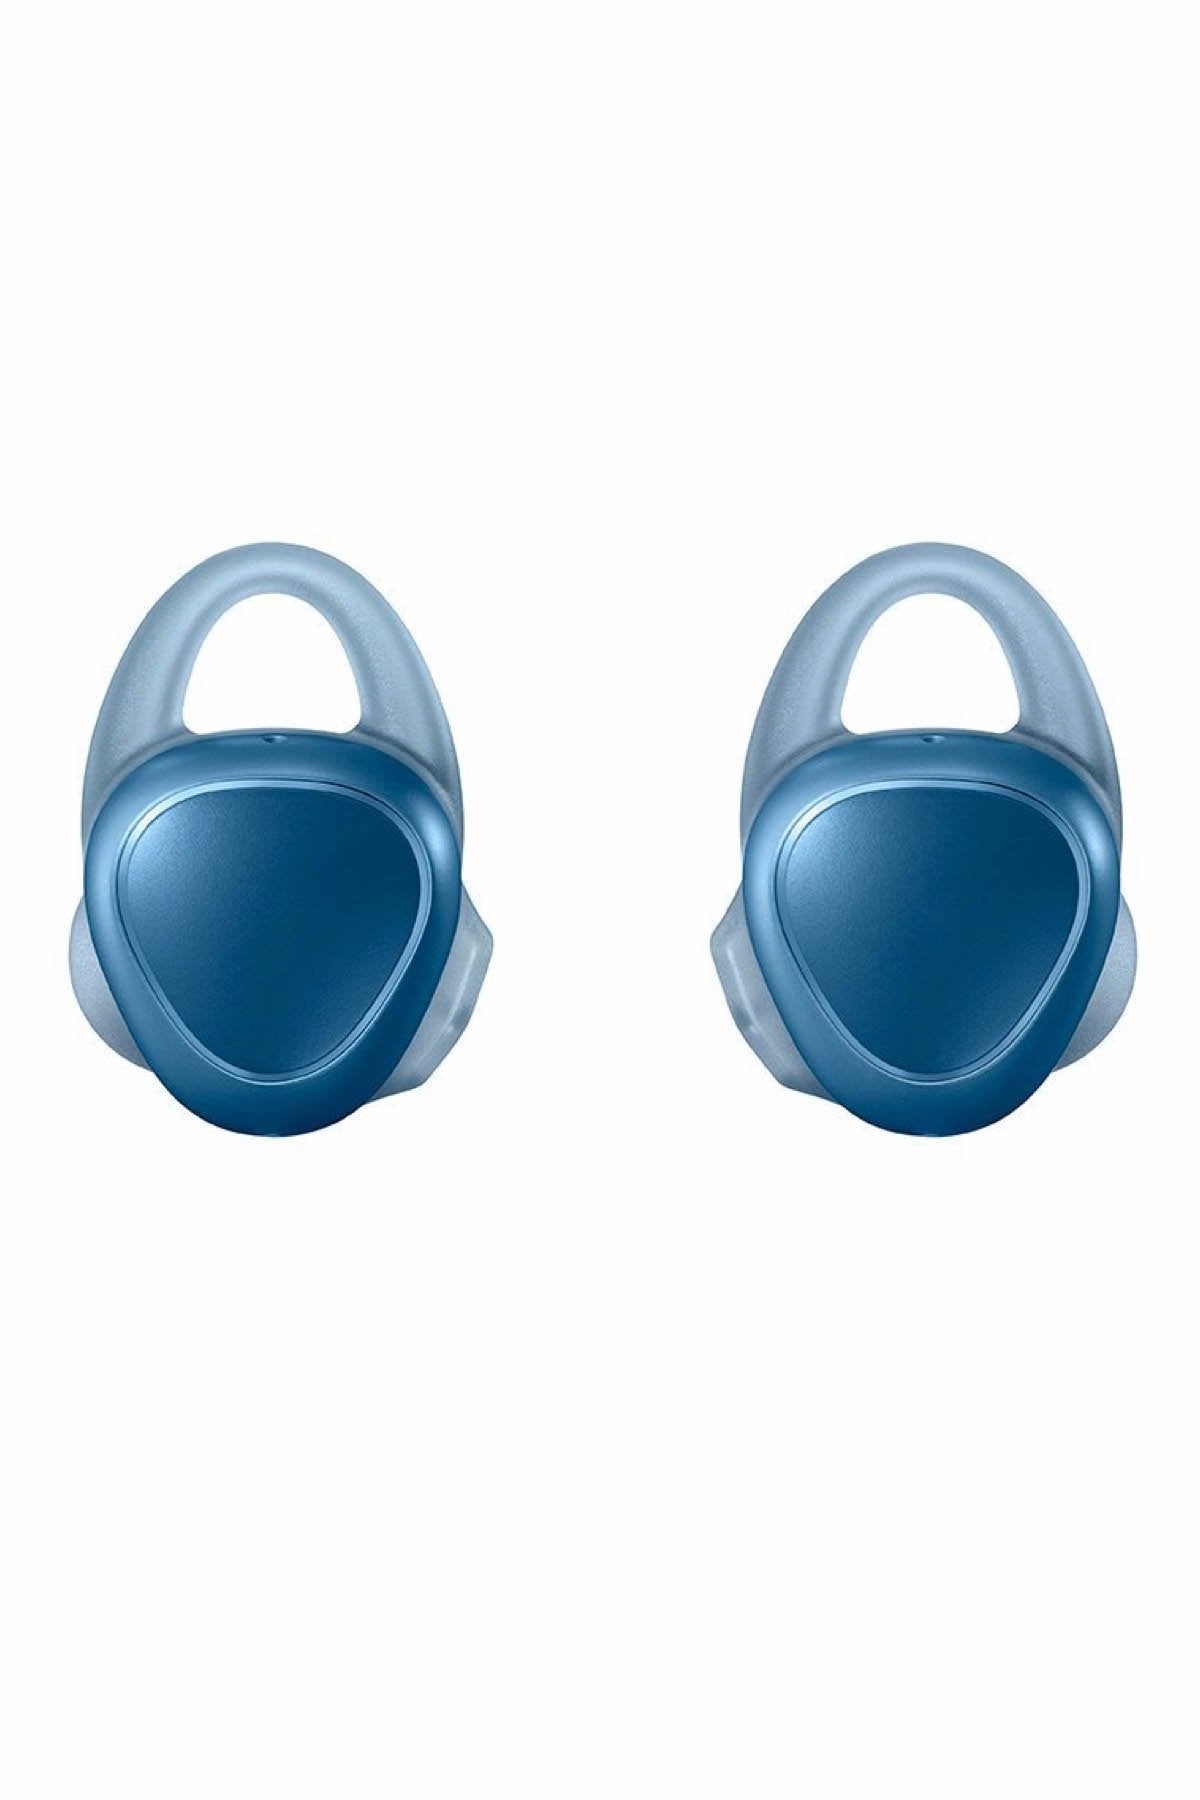 Samsung Blue Gear IconX Cordfree Fitness Earbuds With Activity Tracker